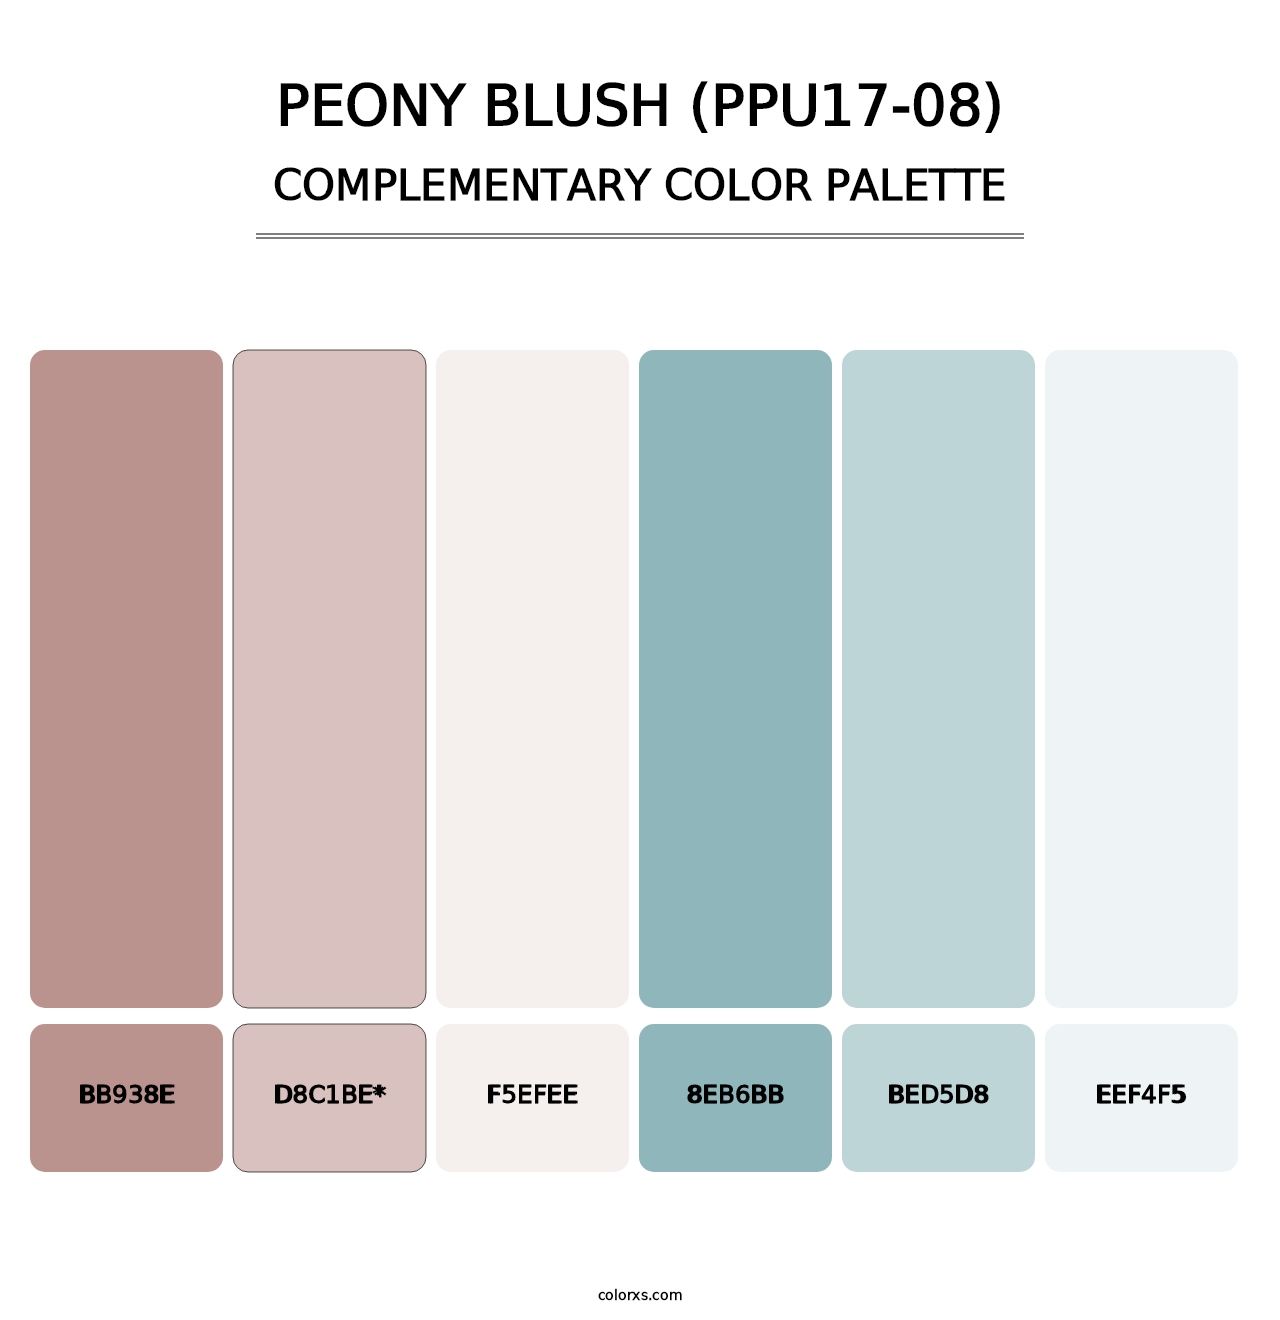 Peony Blush (PPU17-08) - Complementary Color Palette